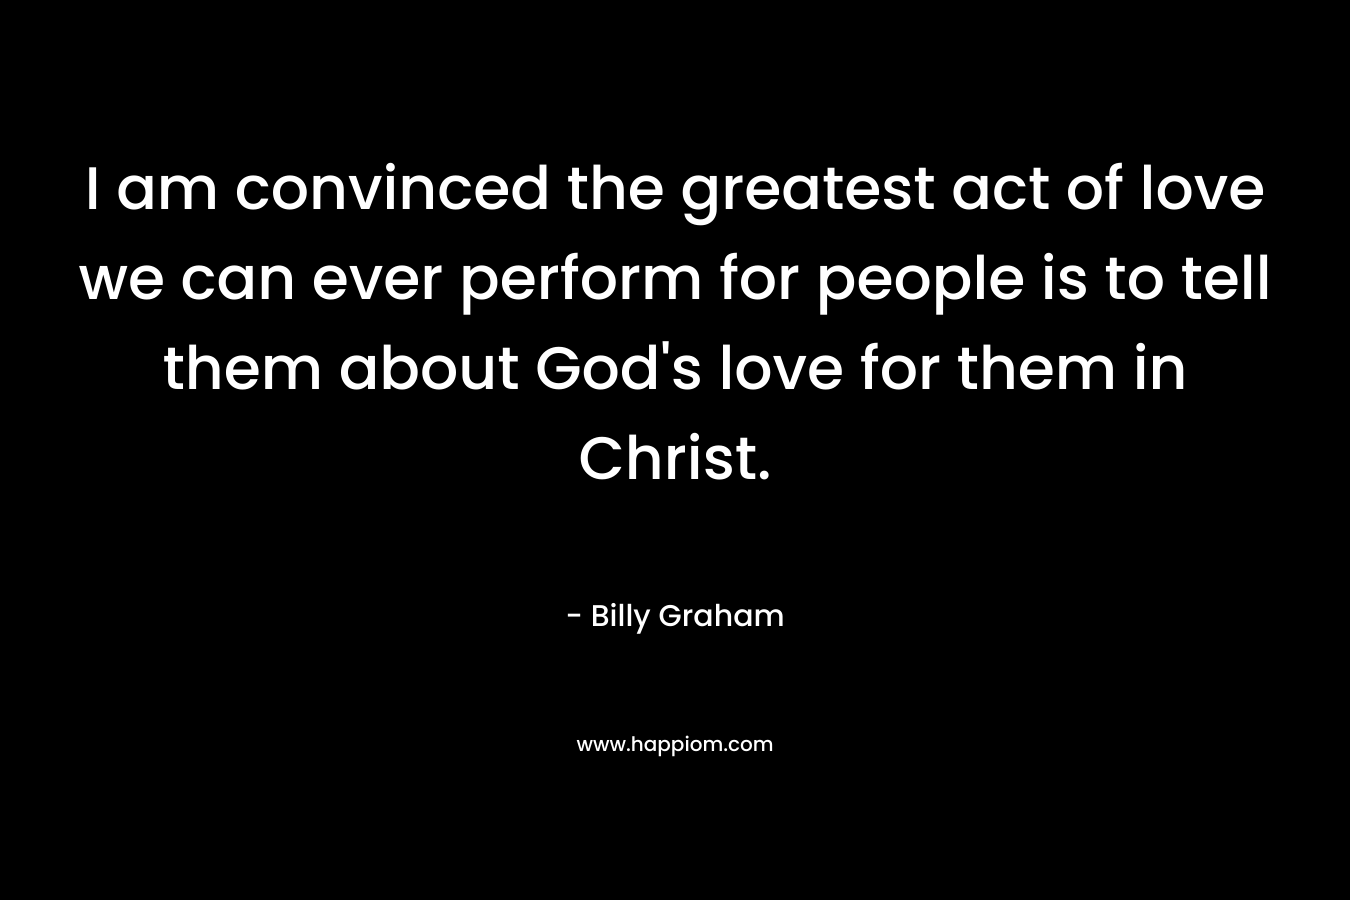 I am convinced the greatest act of love we can ever perform for people is to tell them about God's love for them in Christ.